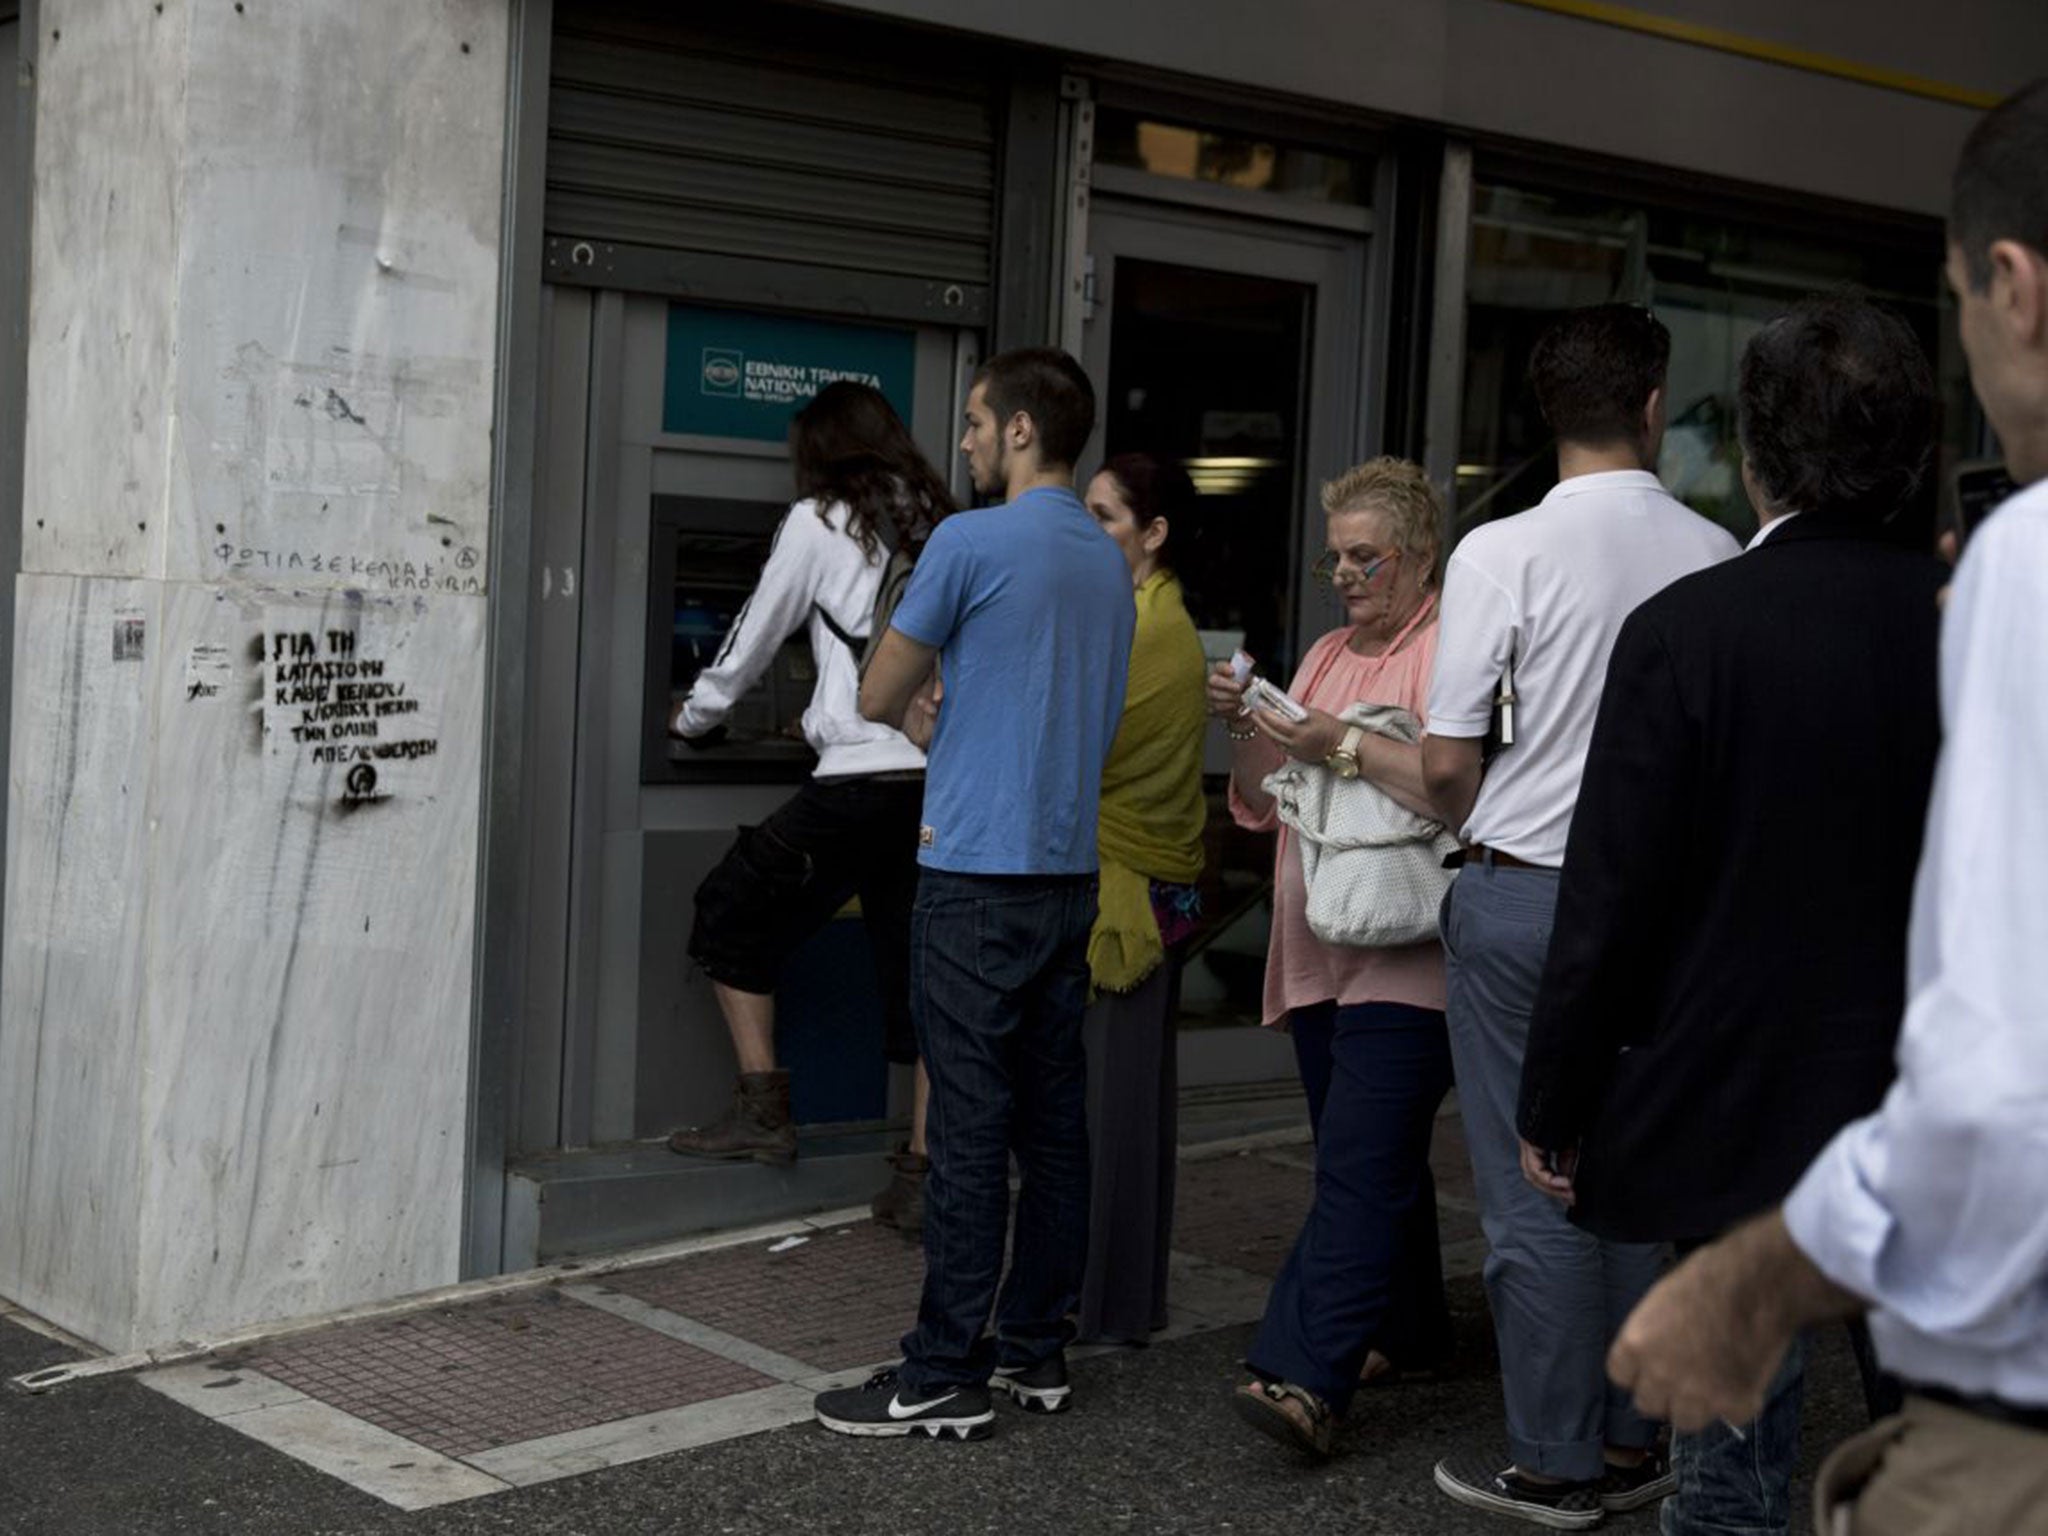 People line up at an ATM outside a branch of the National Bank, in central Athens, on Friday, June 19, 2015. Greece failed to secure a deal with bailout creditors on Friday, prompting the European Union to calls an emergency leaders' meeting for Monday.